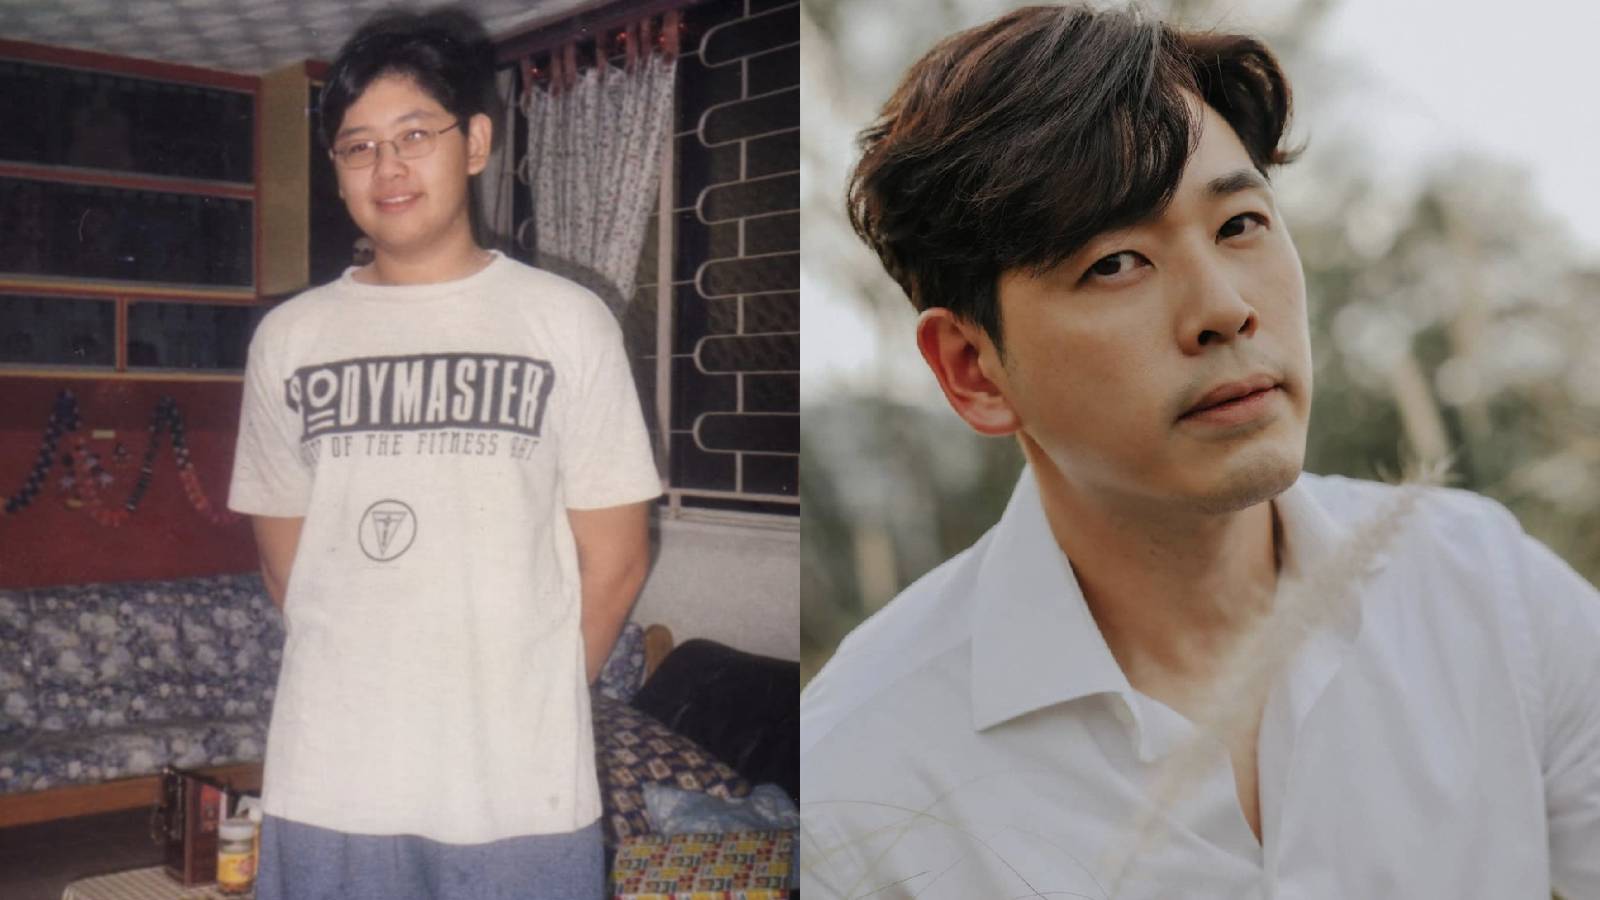 Romeo Tan Posts Cute Throwback Pic; Says He “Misses The Carefree Days” Of His Youth